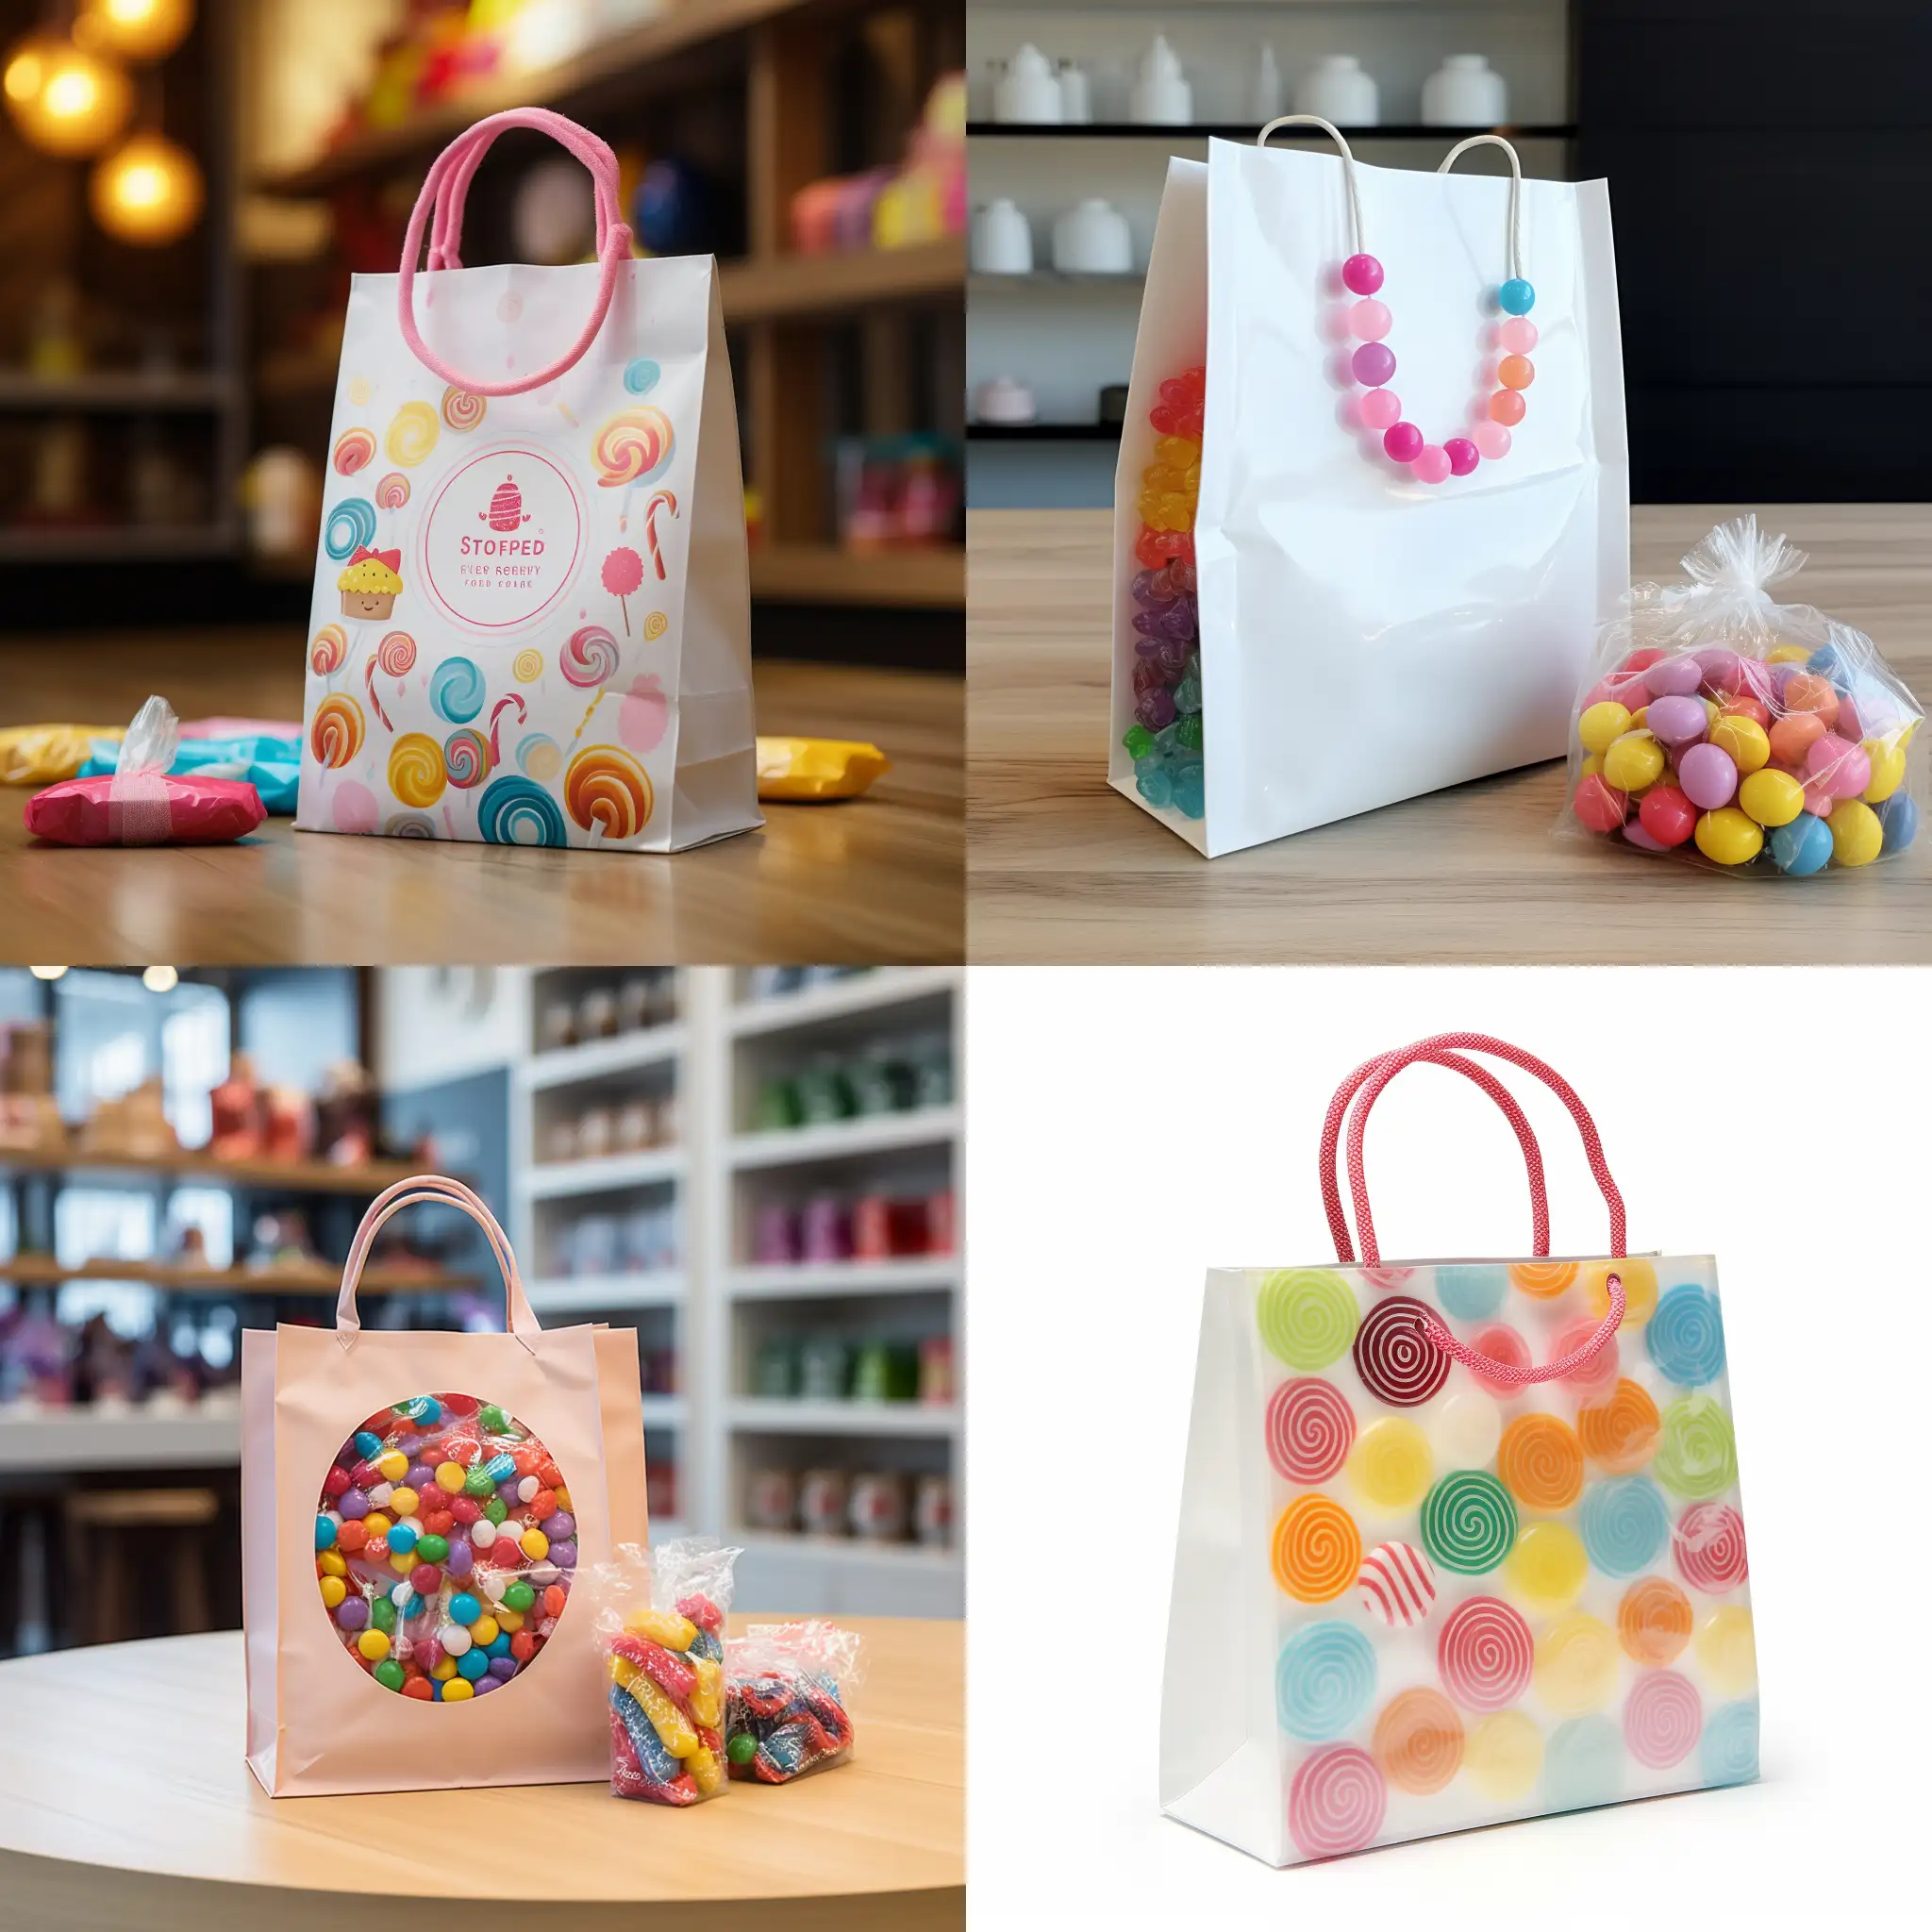 CandyThemed-Gift-Bag-Ideas-in-Simple-Style-for-Special-Occasions